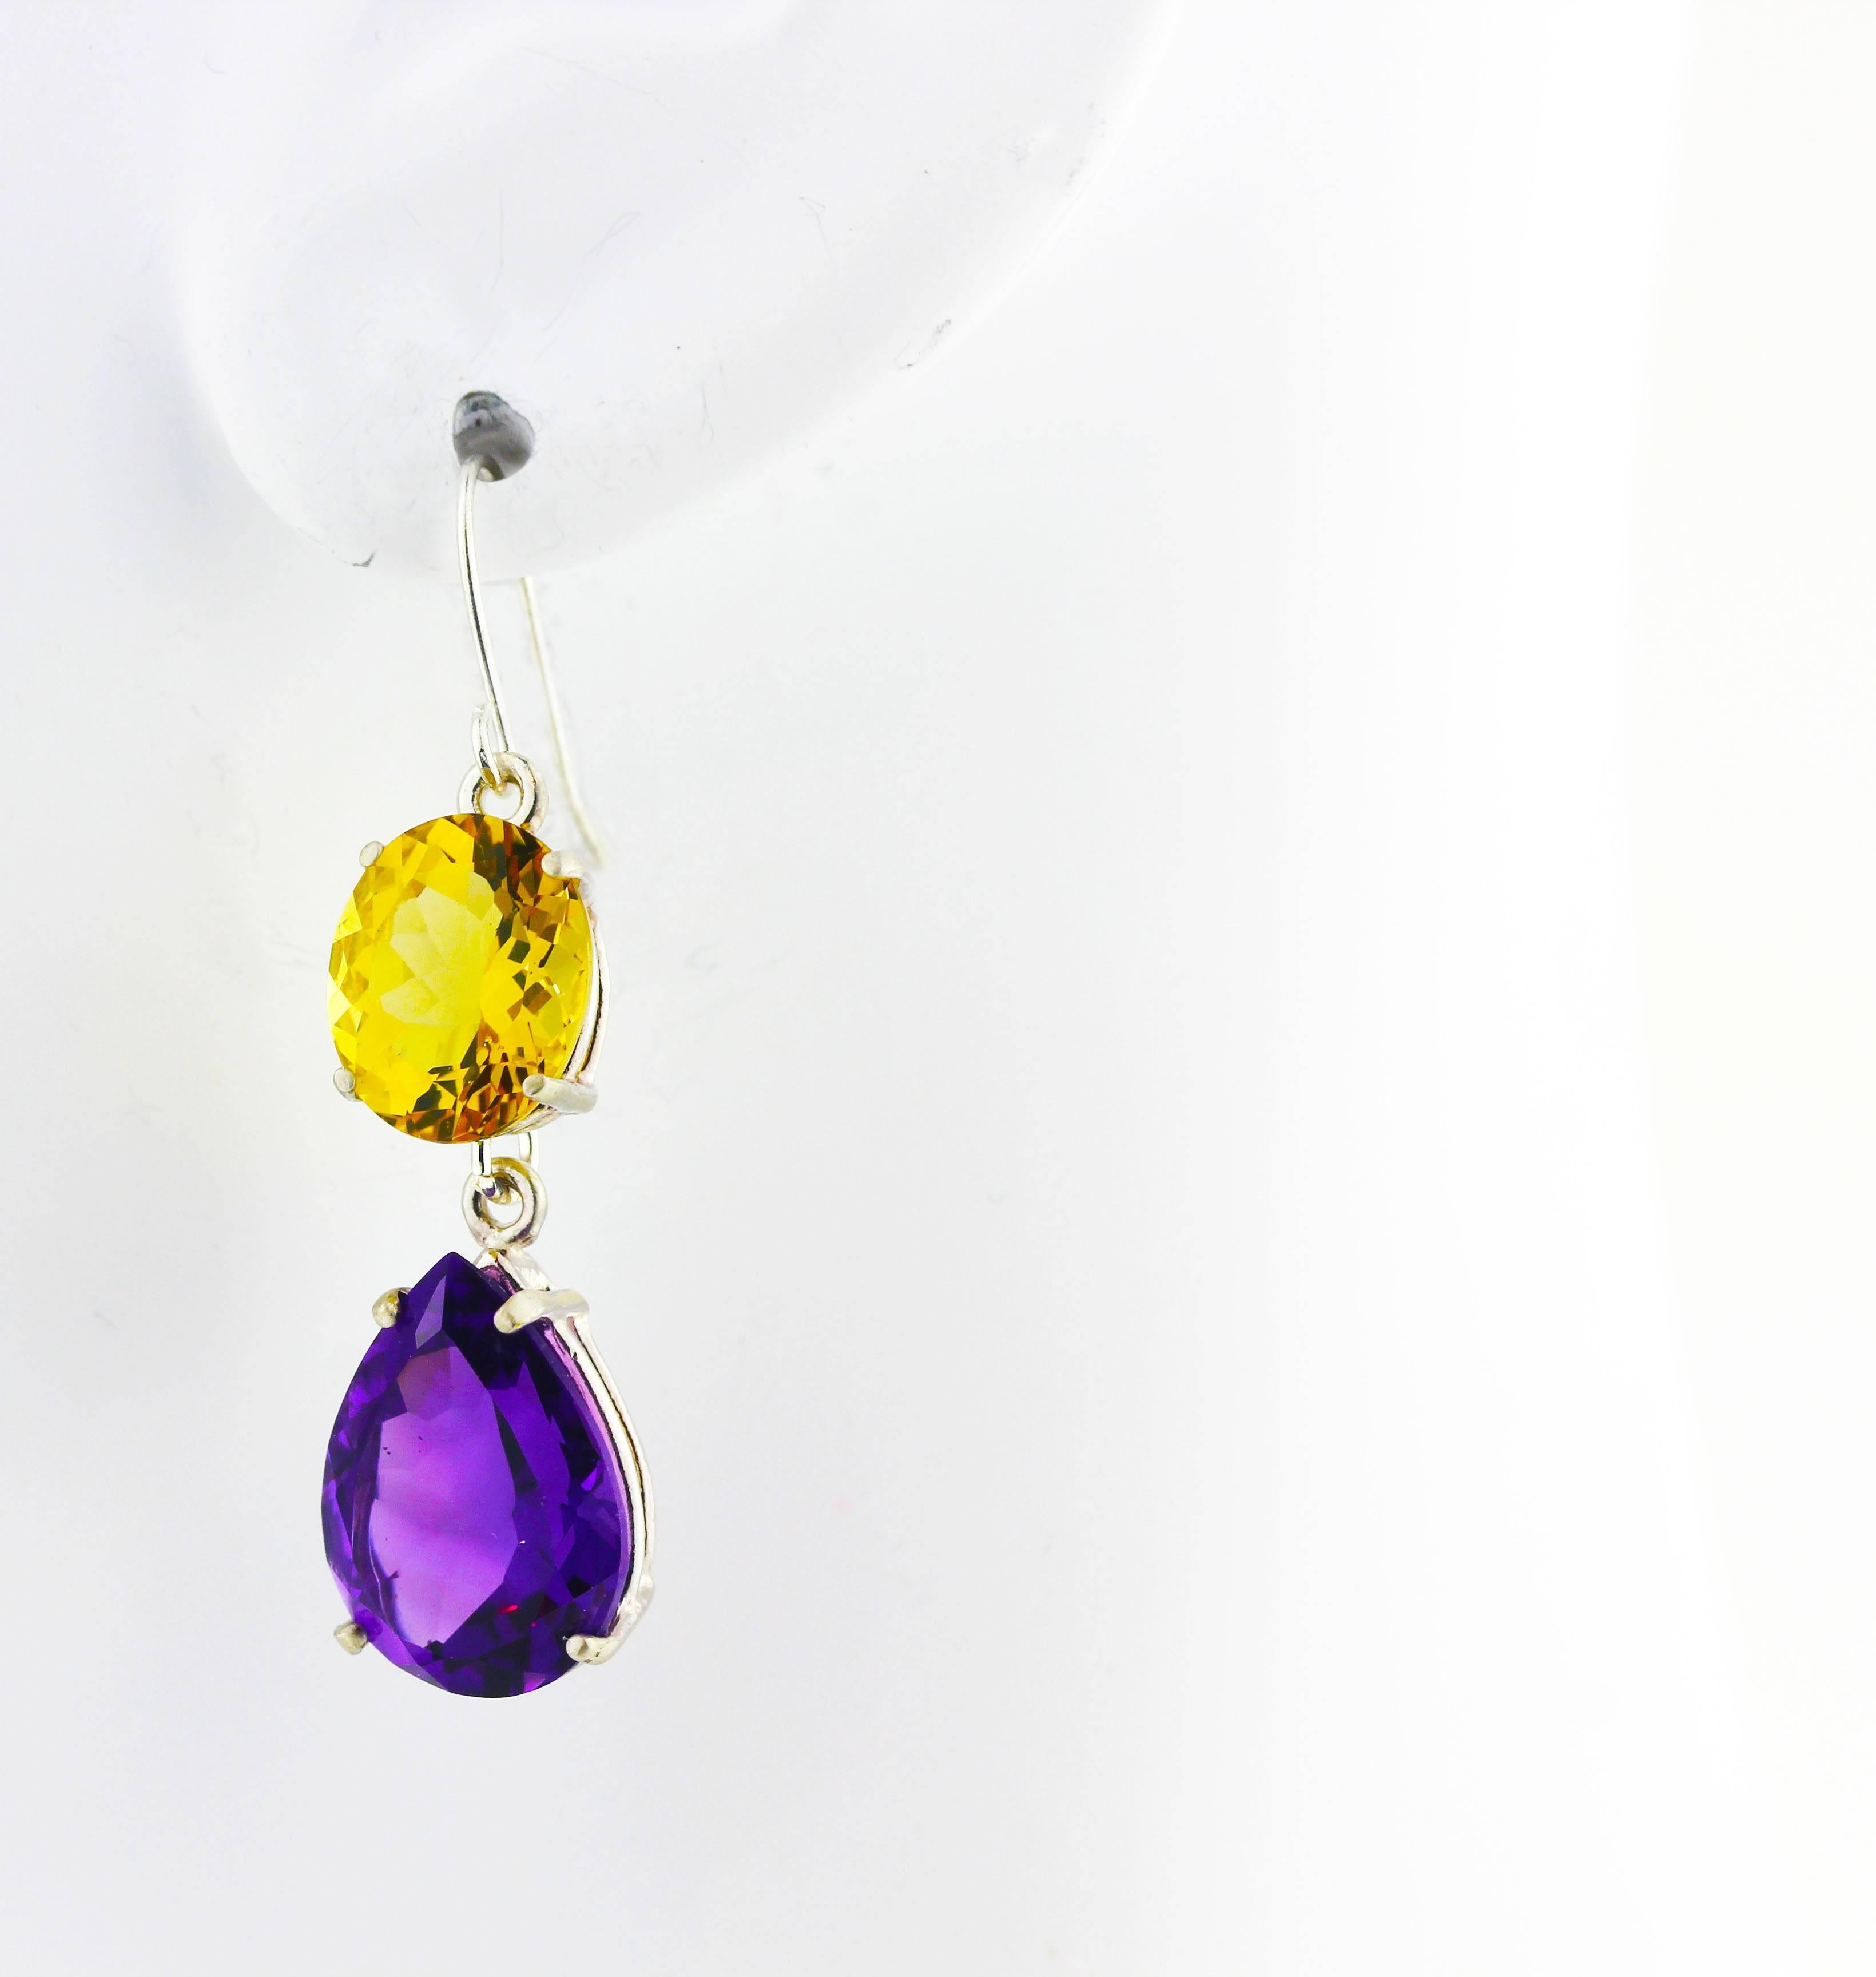 Dangling brilliant purple 12 carats total of pear cut Amethysts (15 mm x 10.7 mm) swing delicately from the beautiful oval 6.85 carats total of glittering natural yellow Beryls (11 mm x 9 mm) sterling silver hook earrings.  They measure 1.6 inches